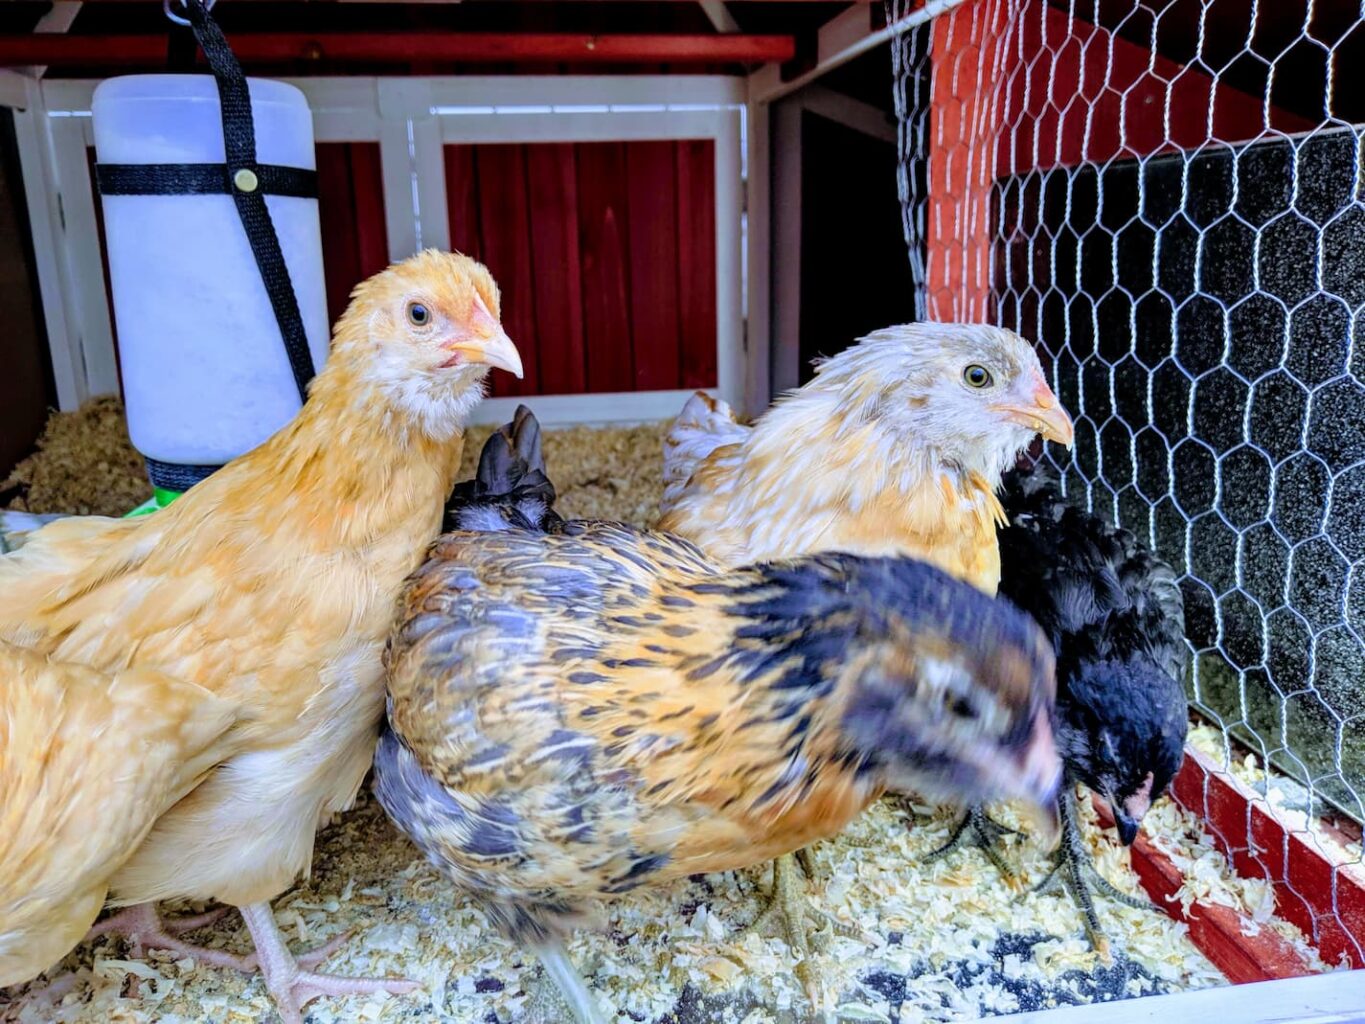 An image of our free-ranging chickens.